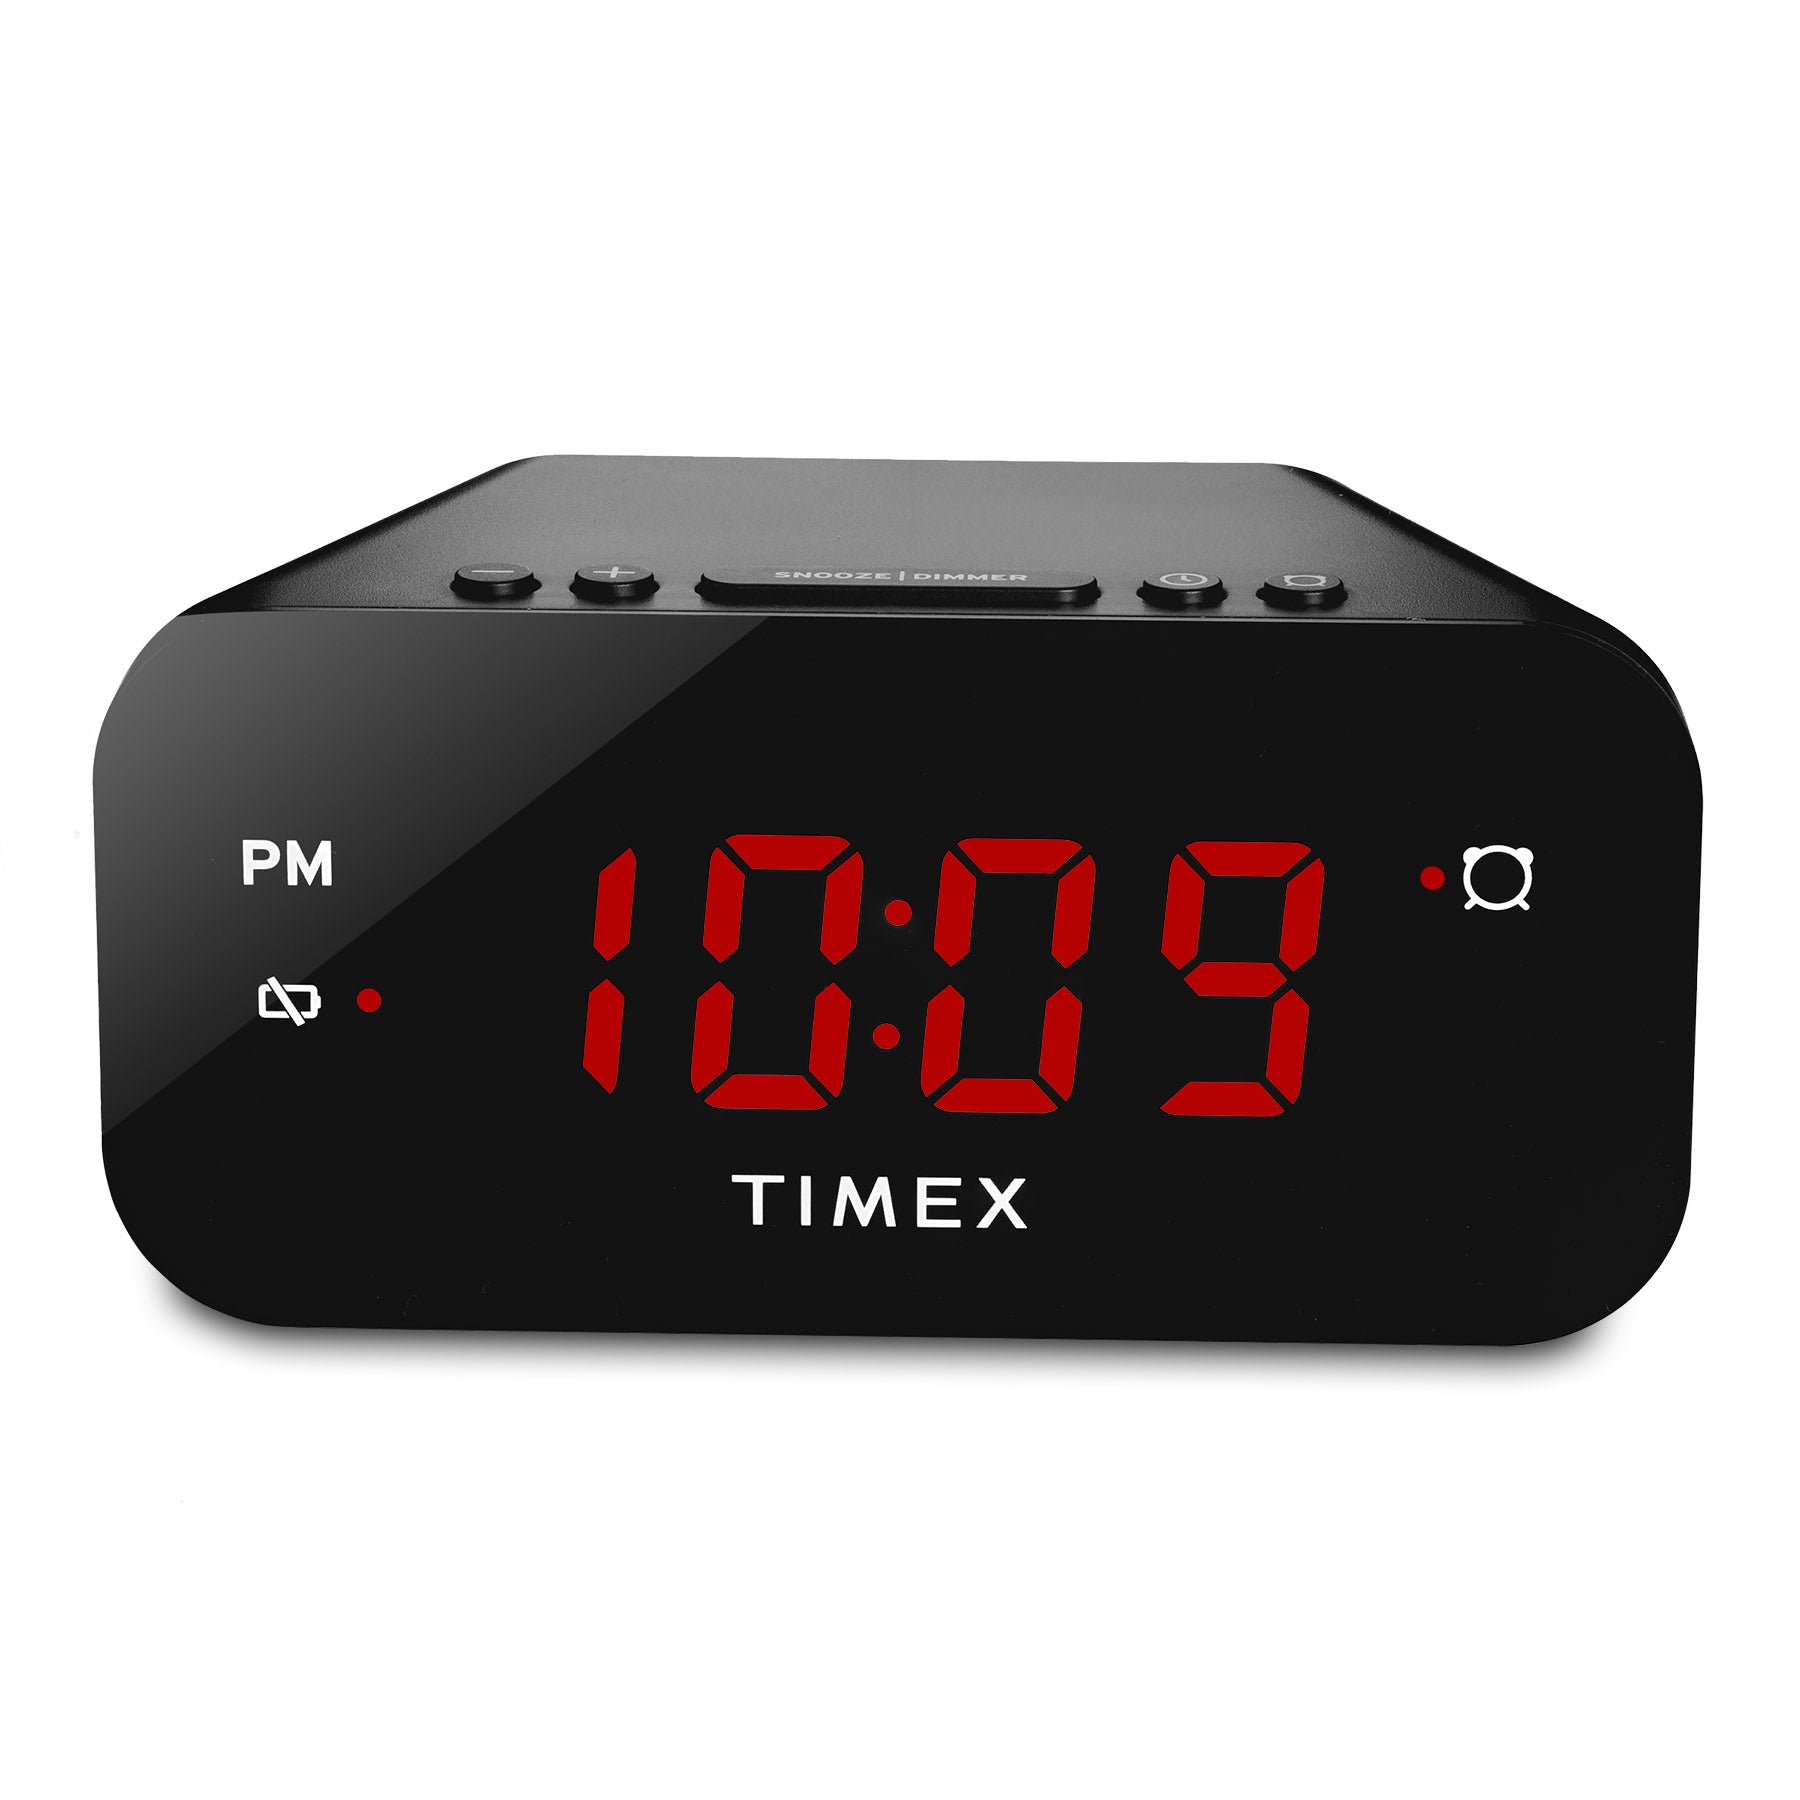 Timex Alarm Clock with Large Display, Includes 120V Power Adapter – Black (T121B)